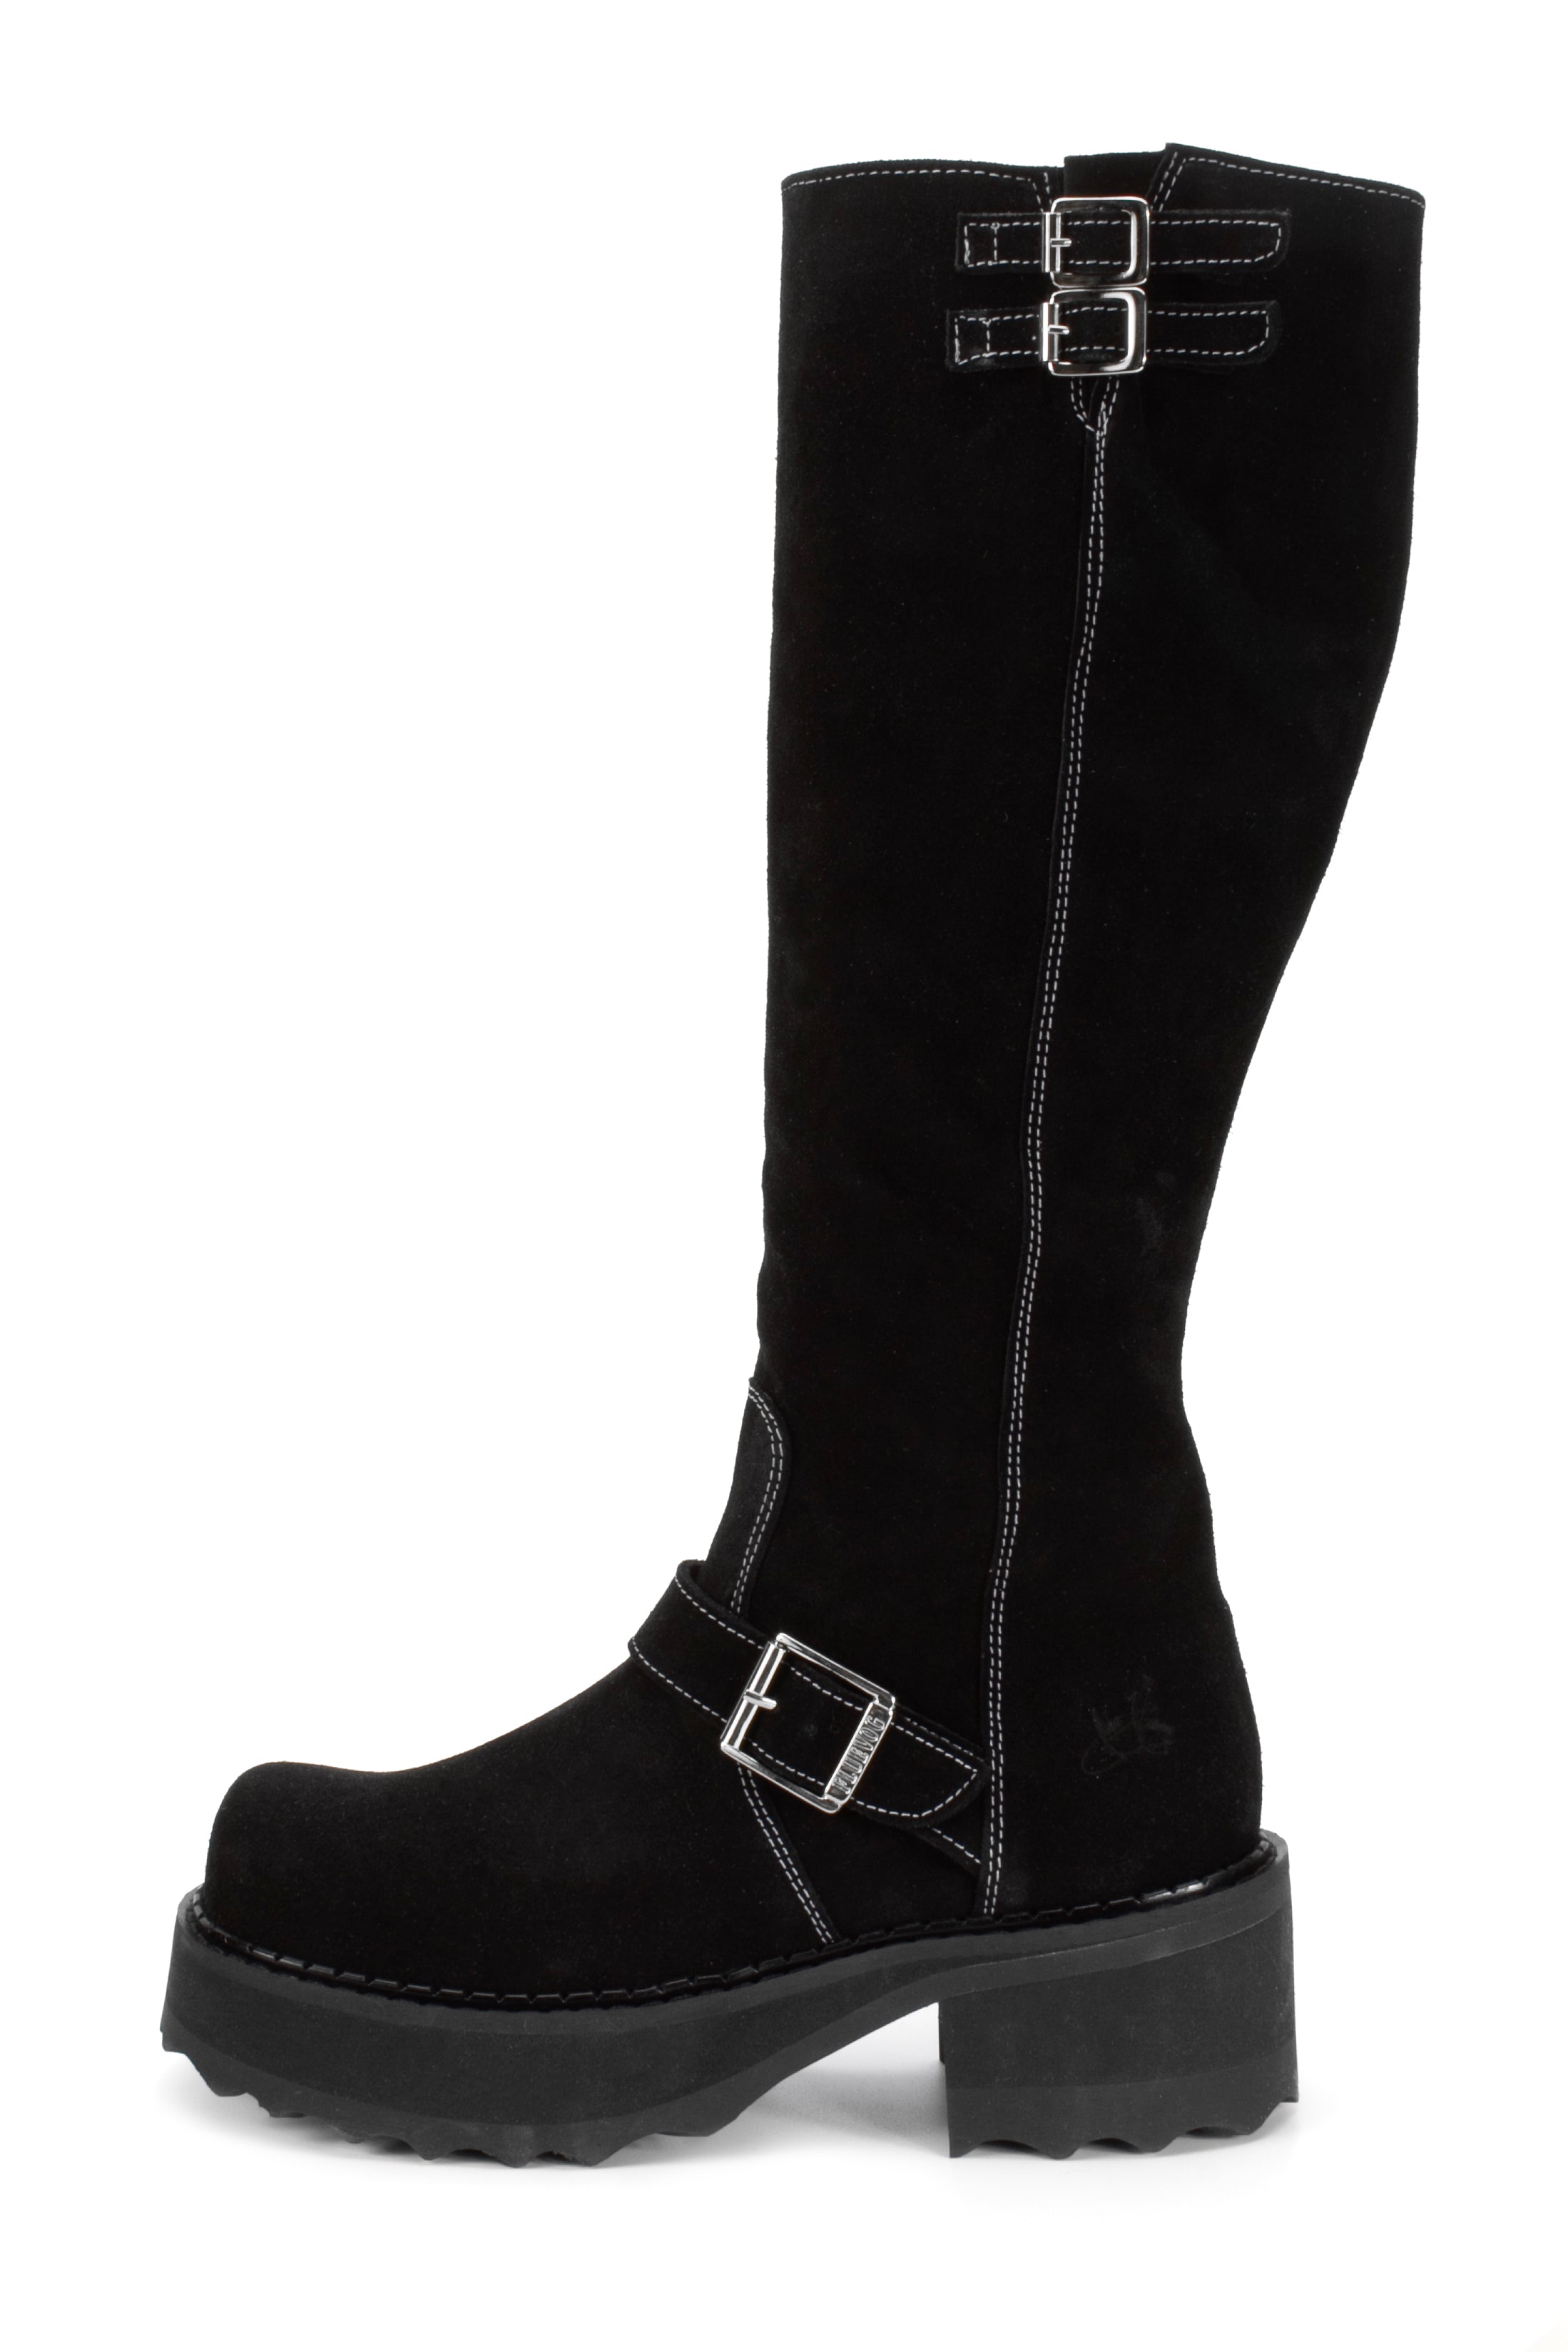 The Anna Sui x John Fluevog Bondgirl Boot in Black is an under-the-knee-high, black suede boot with a leather top sole and a heel height of 1.5